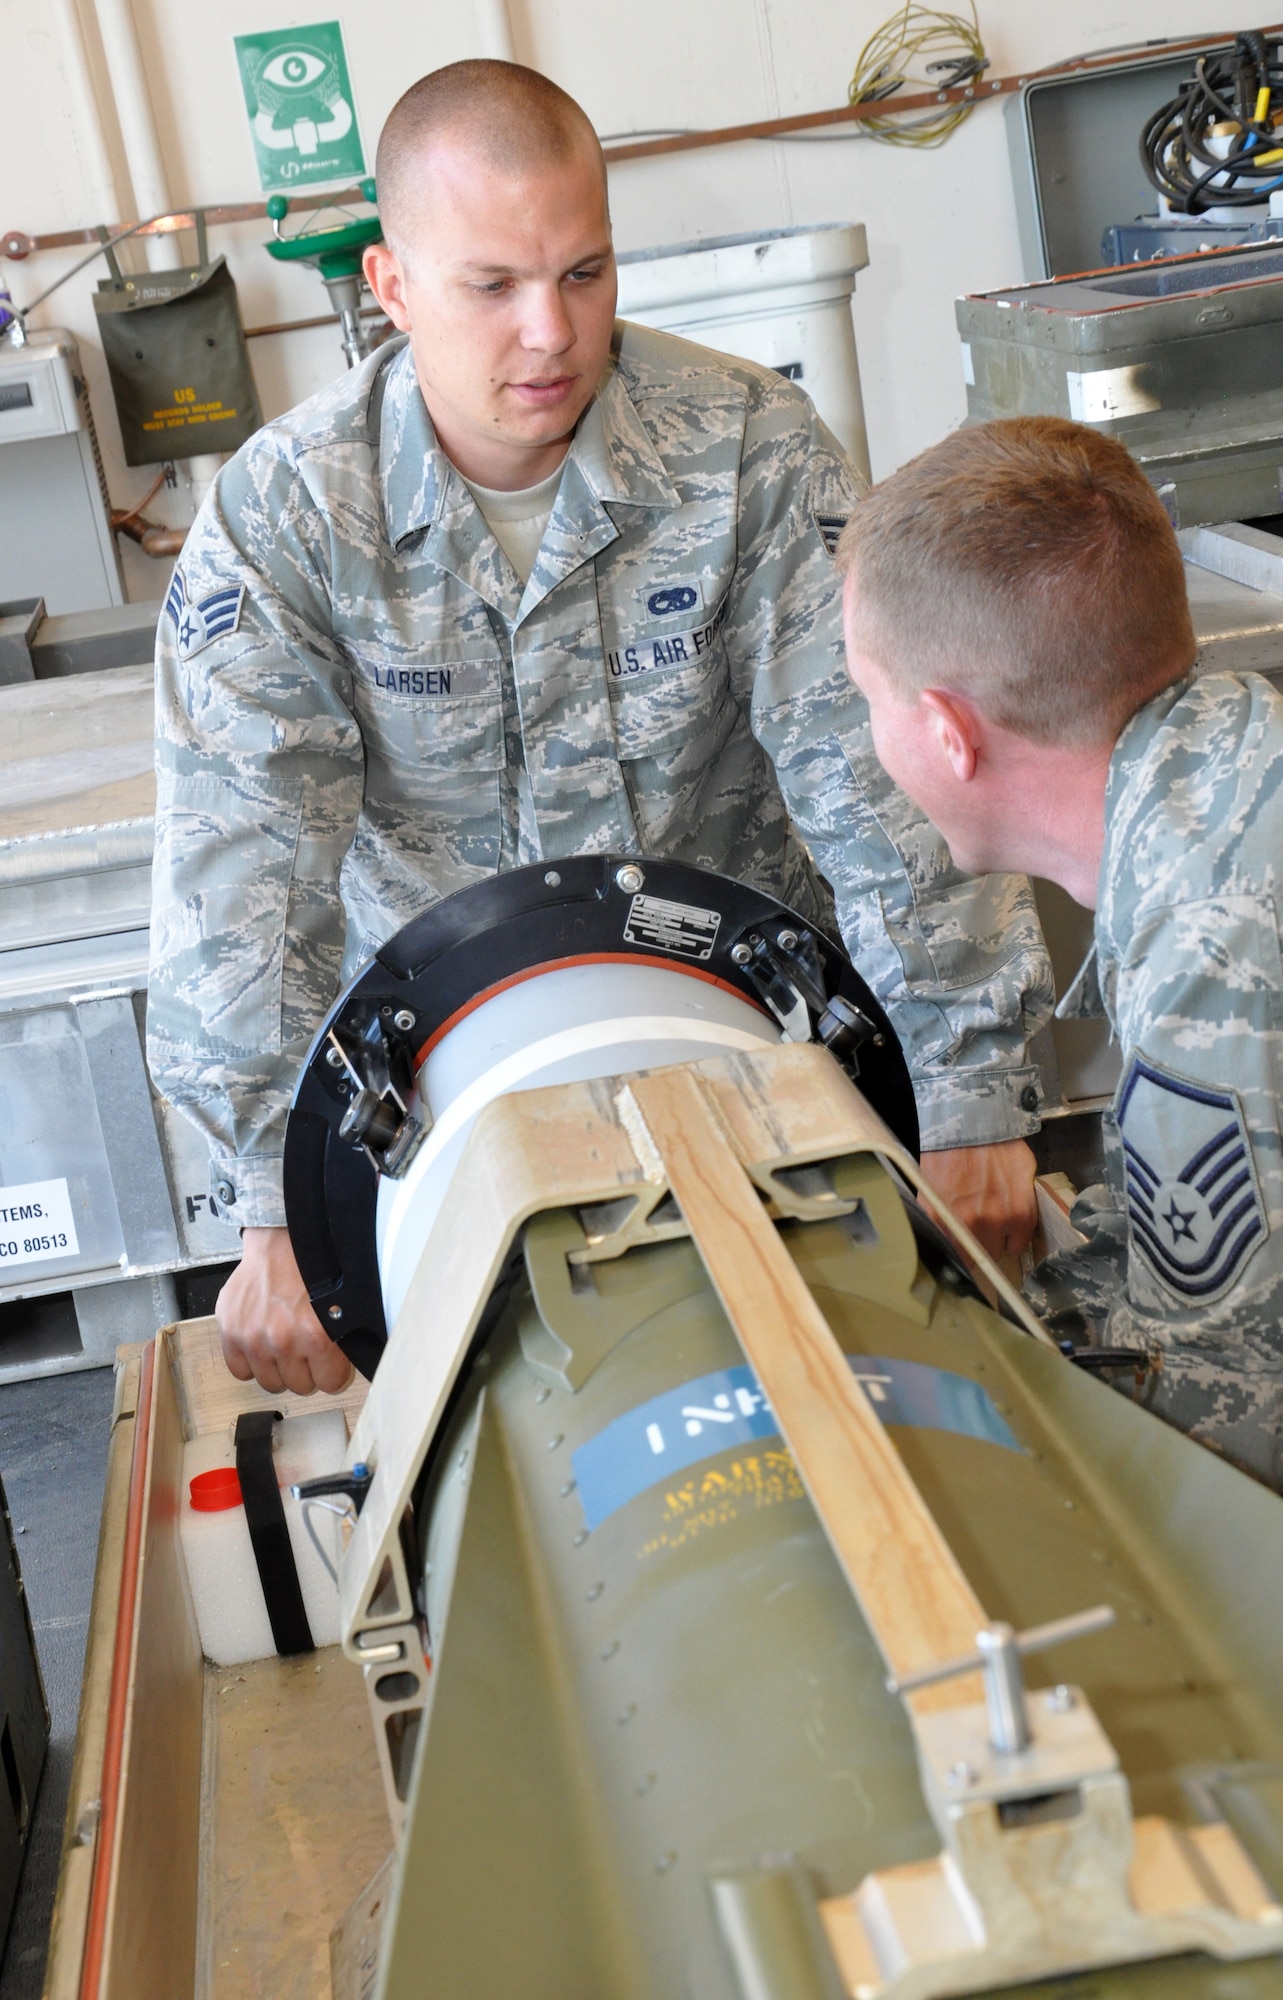 Senior Airman Dylan Larsen, 140th Wing precision guided munitions crew member, left, works with Master Sgt. Bradley Mercil, 140th Wing production superintendent, to test an AGM-65 Maverick missile Aug. 2, 2013, on Buckley Air Force Base, Colo. The AGM-65 is designed as an air-to-ground weapon system used on the F-16 Fighting Falcons. The 140th Wing handles the munitions needs of units across the Front Range. (U.S. Air Force photo by Staff Sgt. Nicholas Rau/Released)